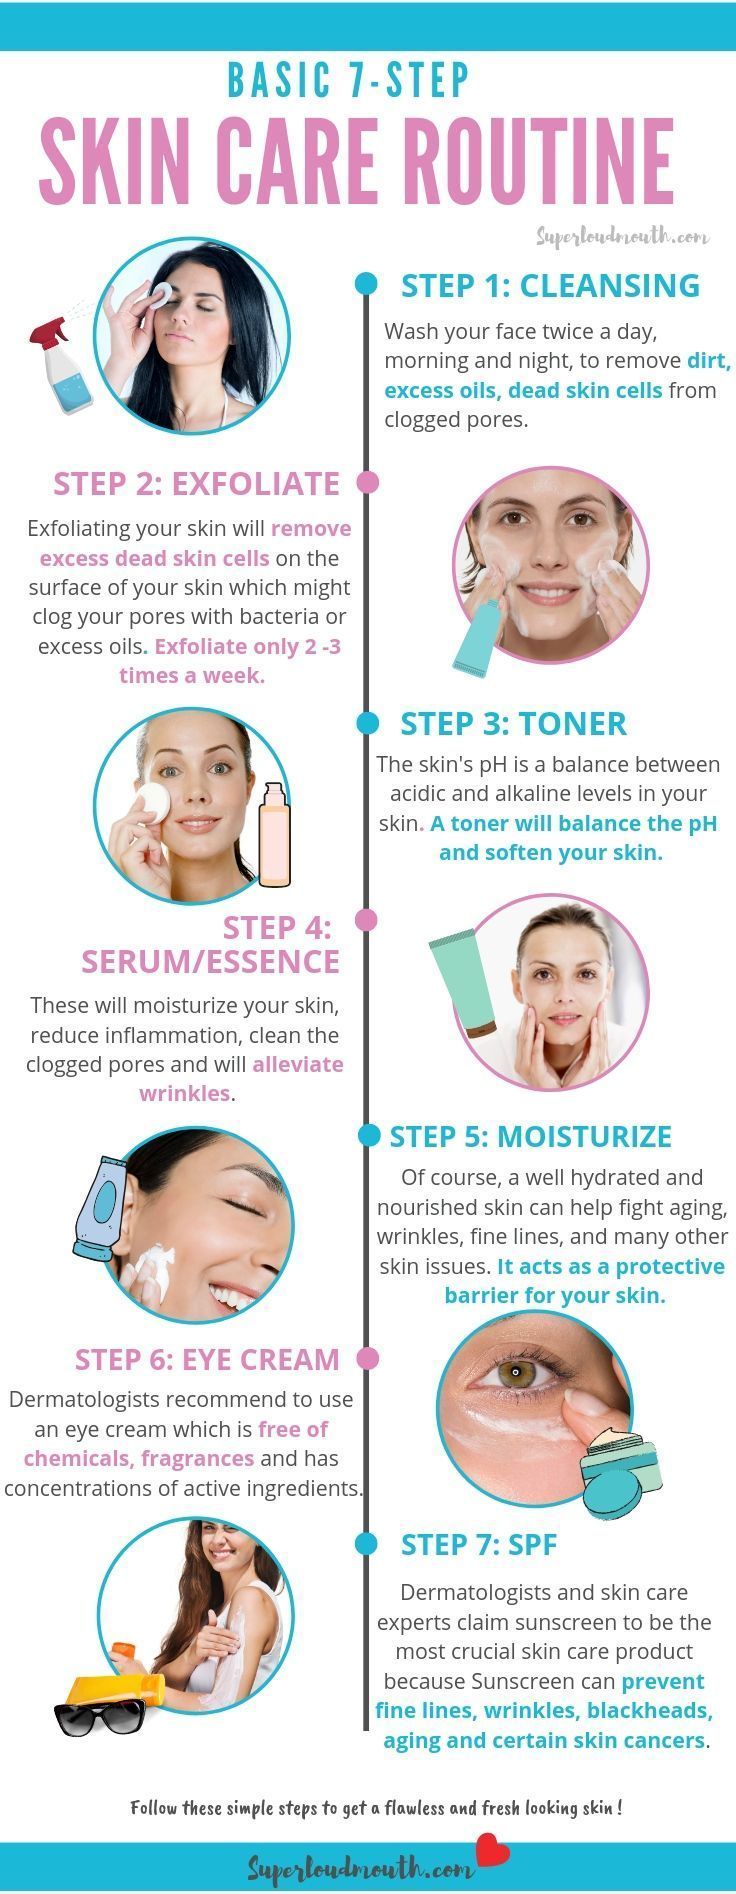 6 Precious Tips To Help You Get Better At Daily Skin Care Routine - 6 Precious Tips To Help You Get Better At Daily Skin Care Routine -   9 beauty Day routine ideas